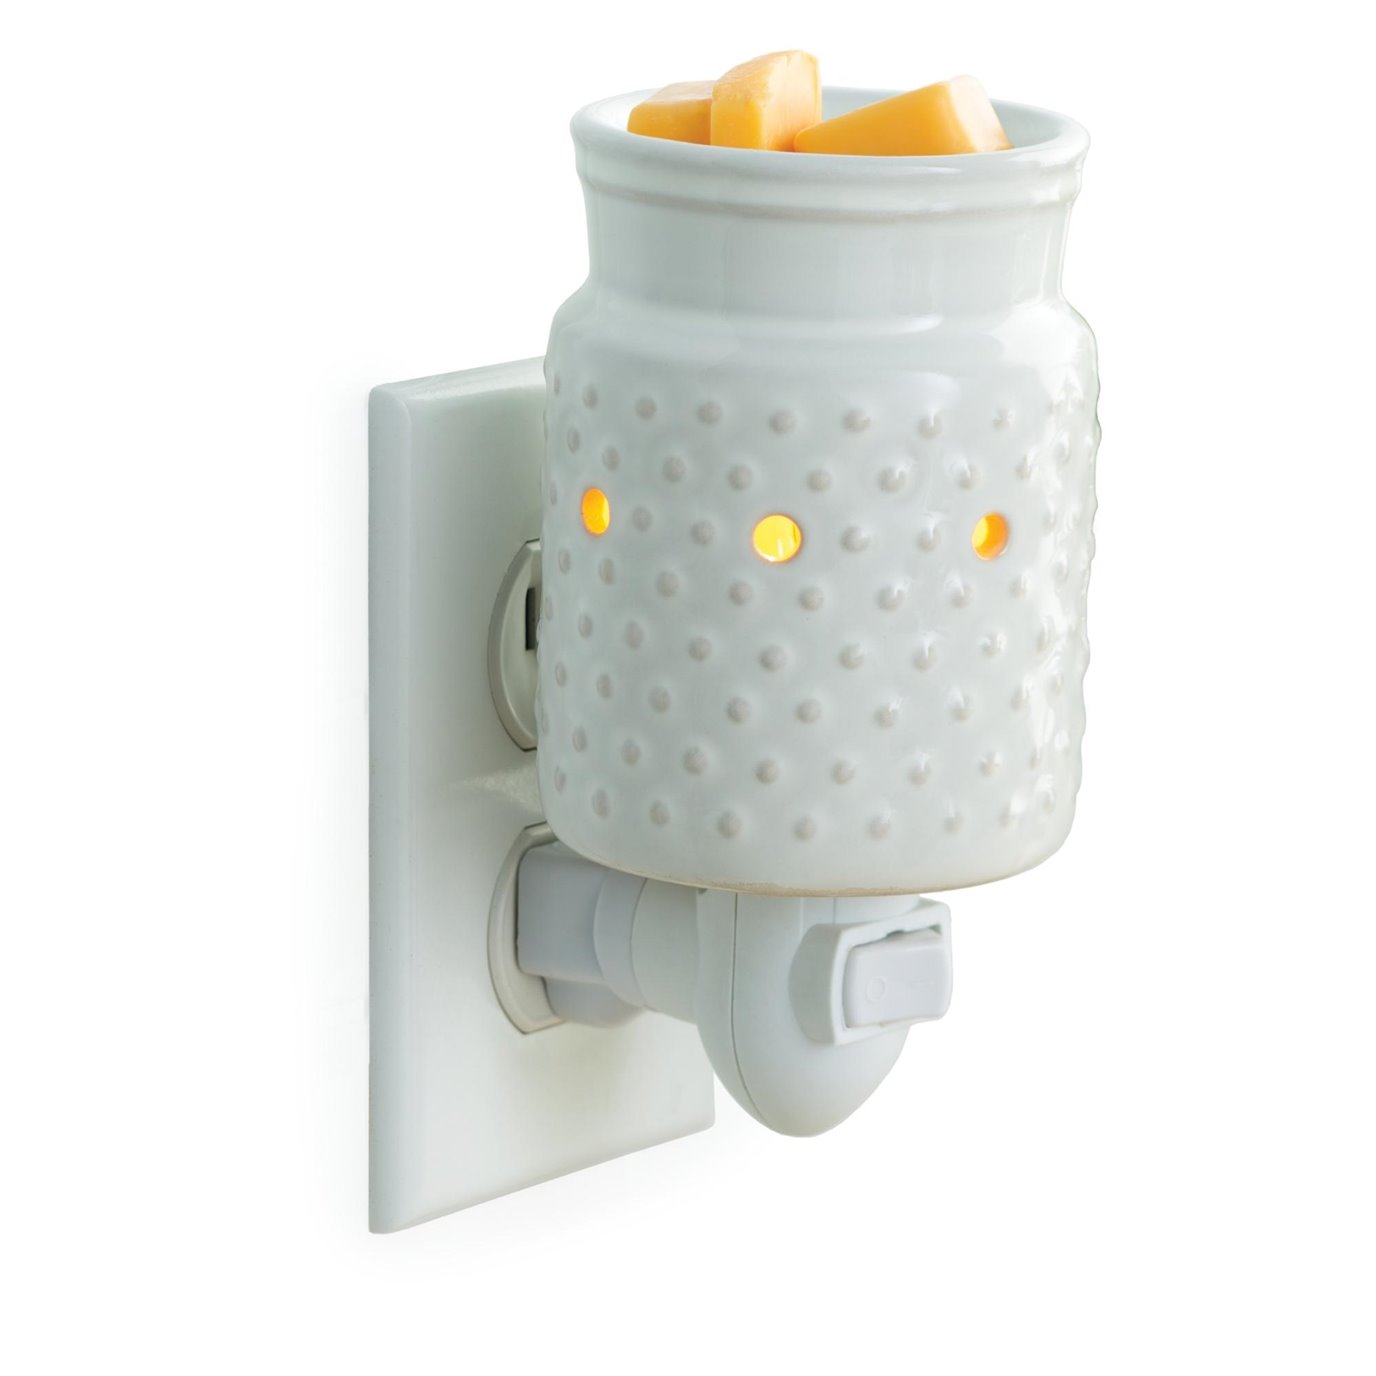 White Hobnail Plug-In Fragrance Warmer by Candle Warmers